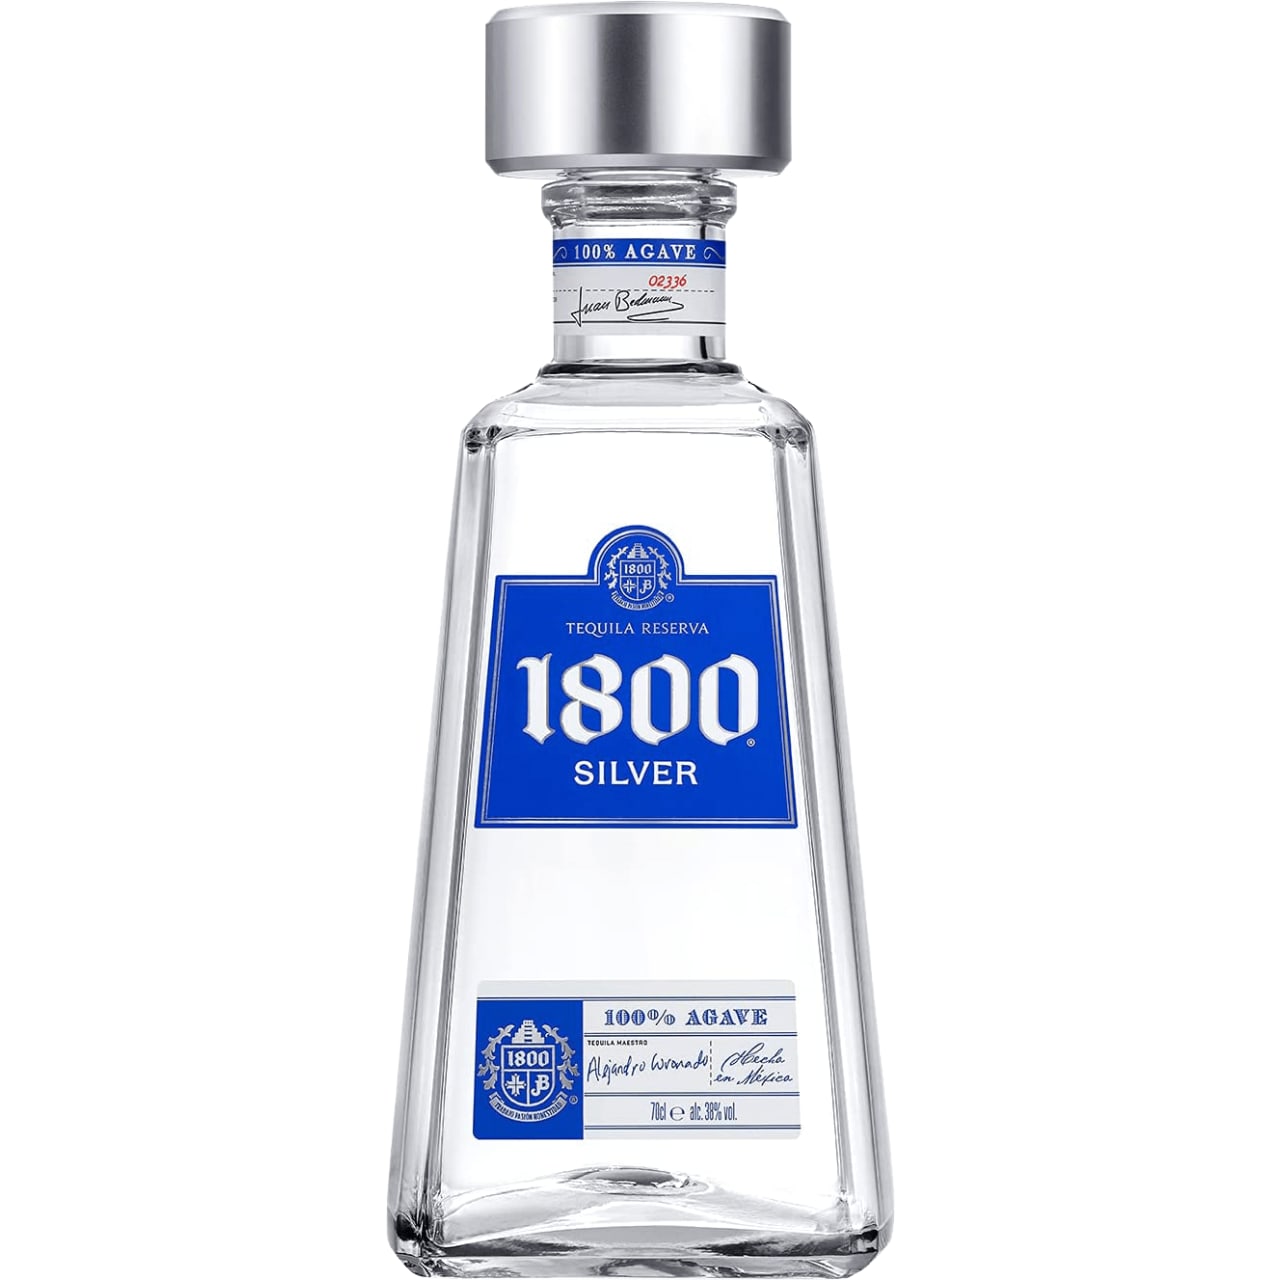 Double distilled, and a special selection of white tequilas is blended together for added complexity and character.